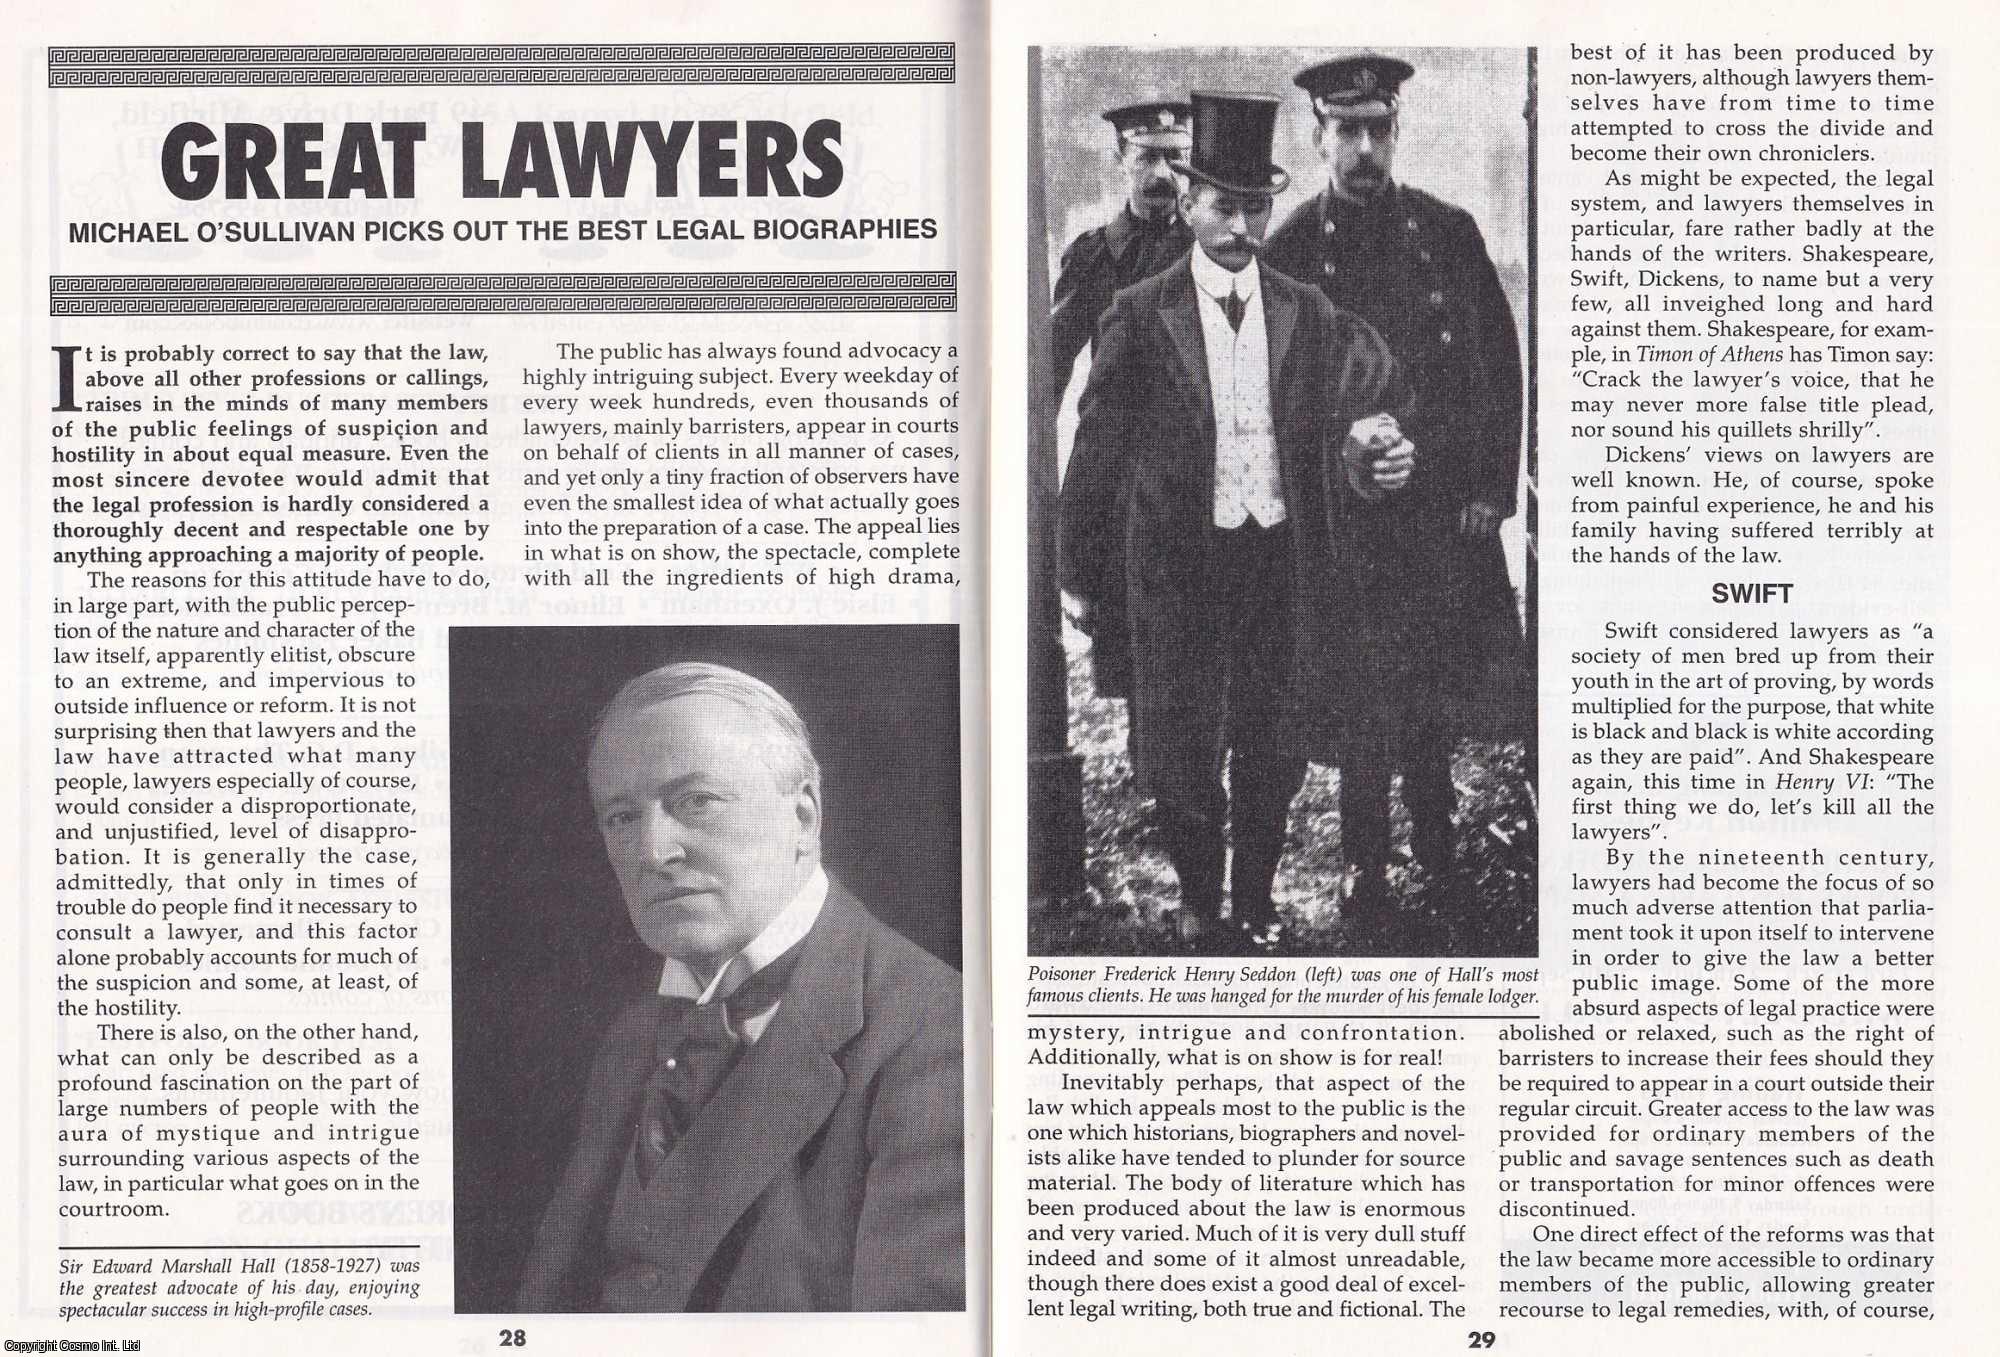 Michael O'Sullivan - Great Lawyers. Picking out The Best Legal Biographies. This is an original article separated from an issue of The Book & Magazine Collector publication.